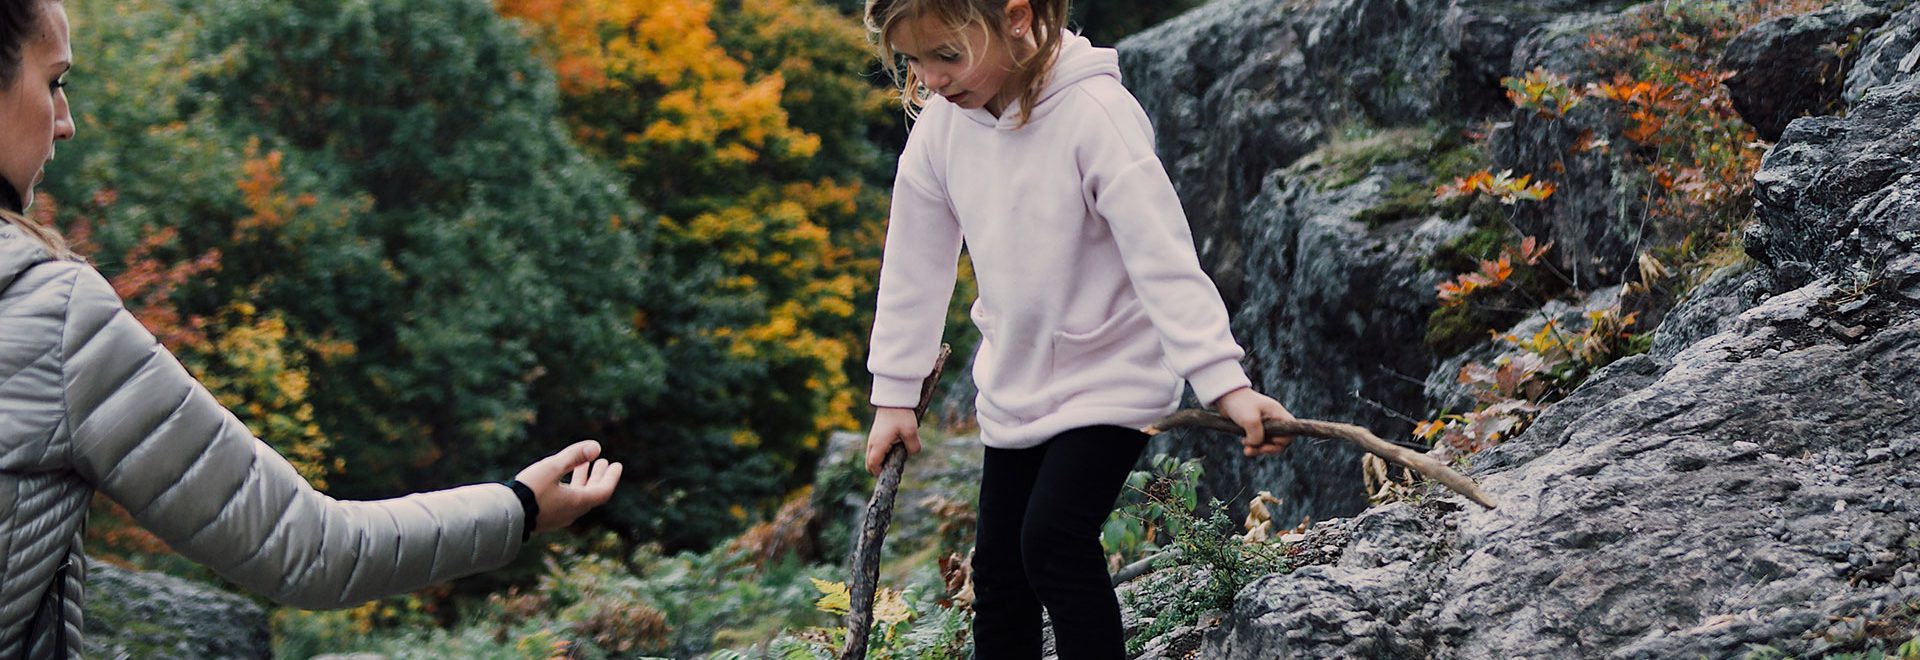 Girl climbing on rocky trail with her mother's help